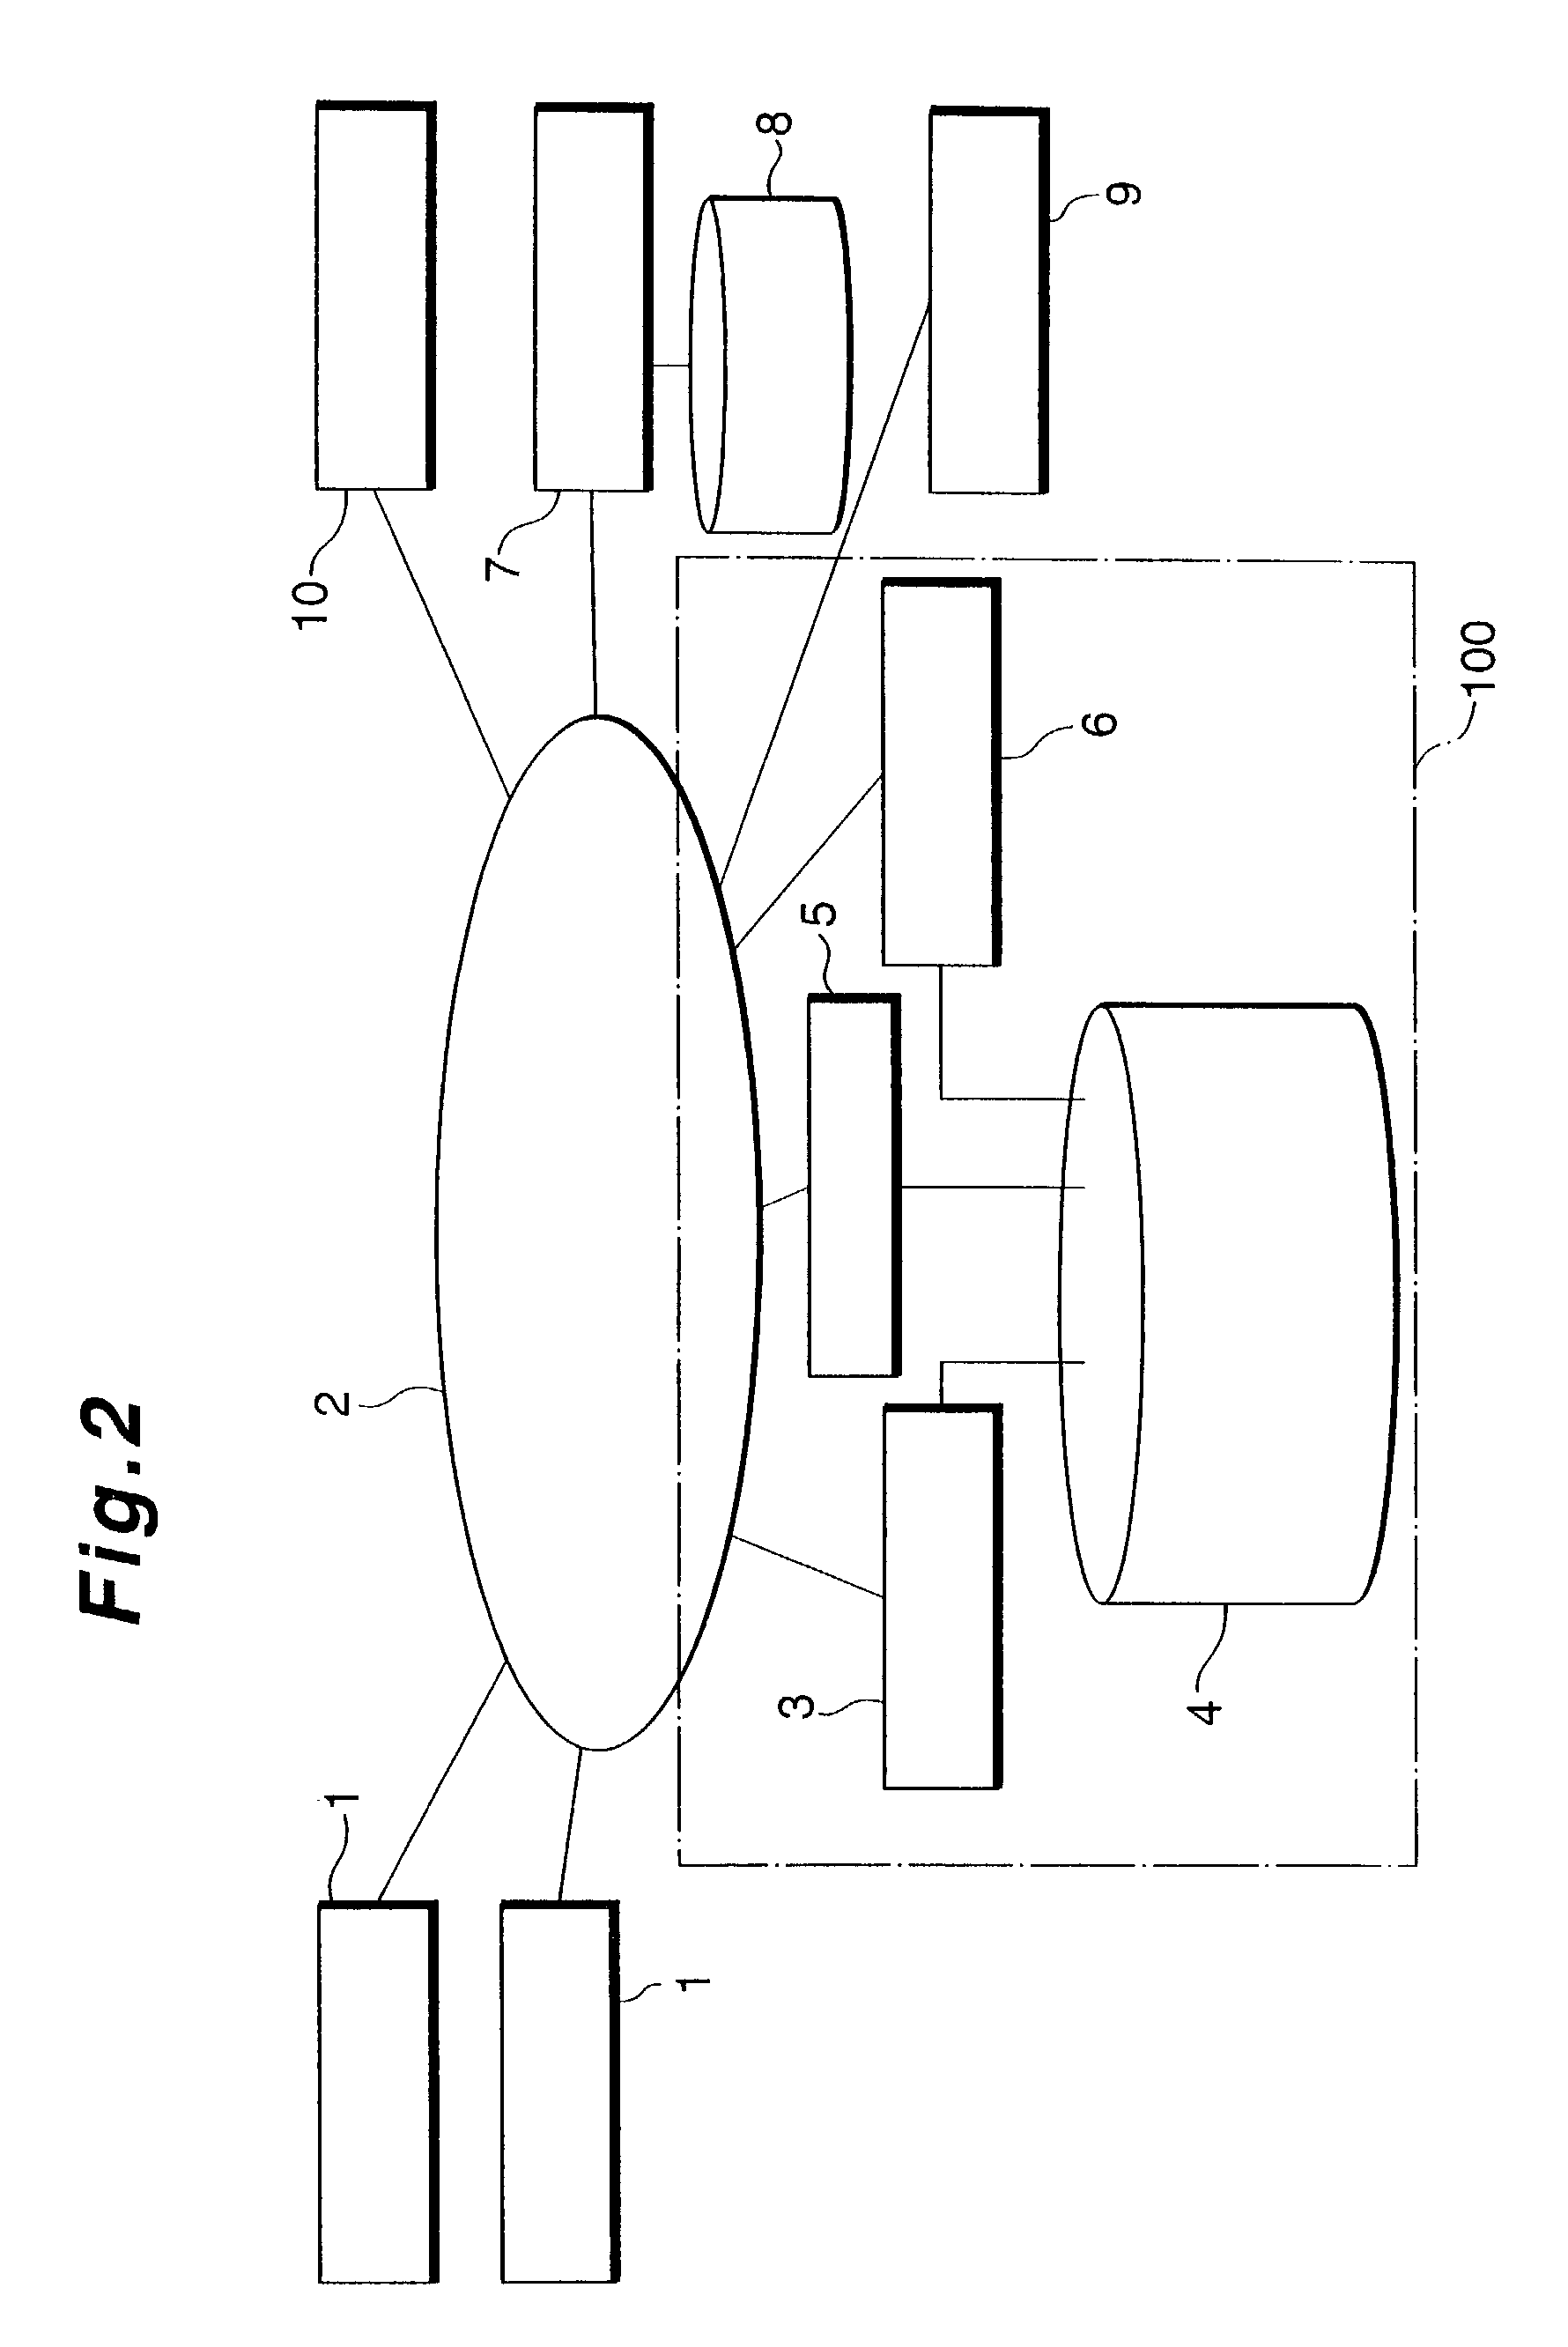 Contents mediating system and contents mediating method